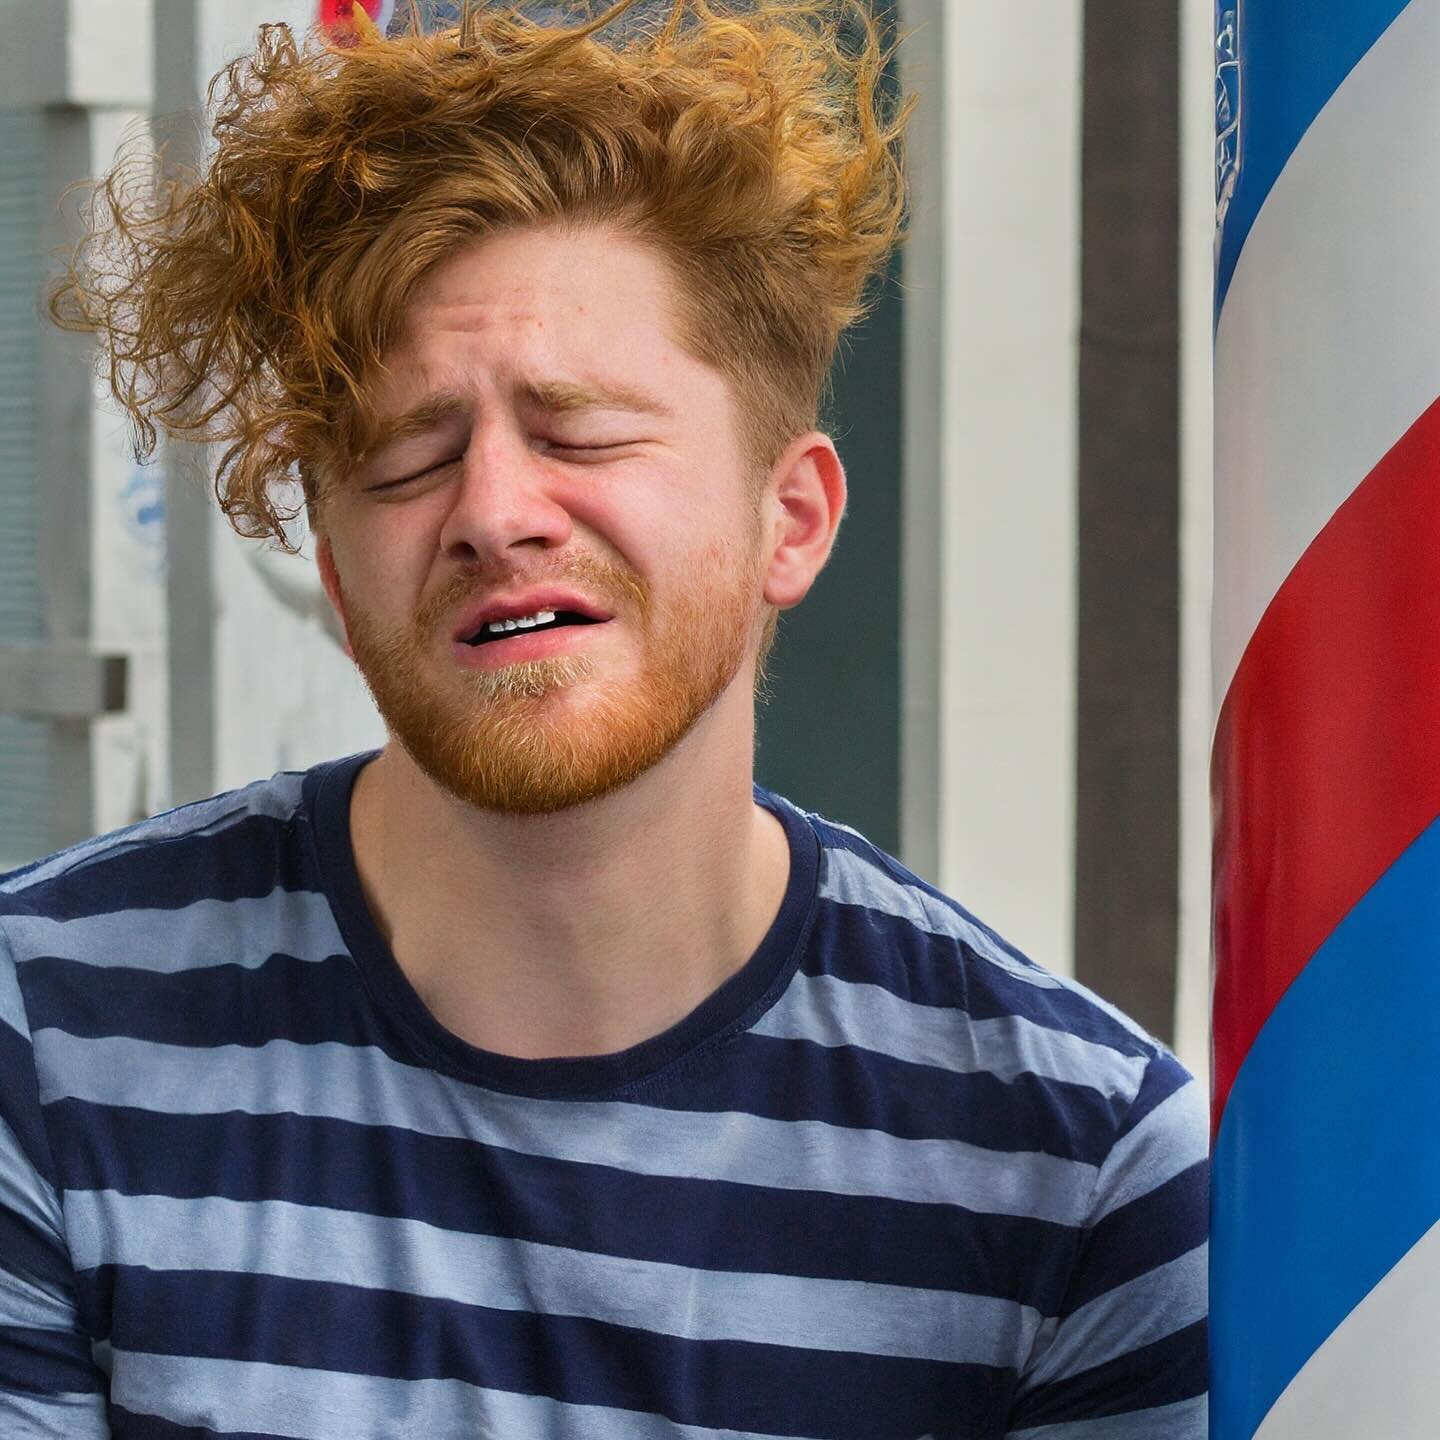 Don&rsquo;t be like this sad ginger fellow and miss out on getting your hair cut before the holidays.  We are booking up FAST so get your spot now!